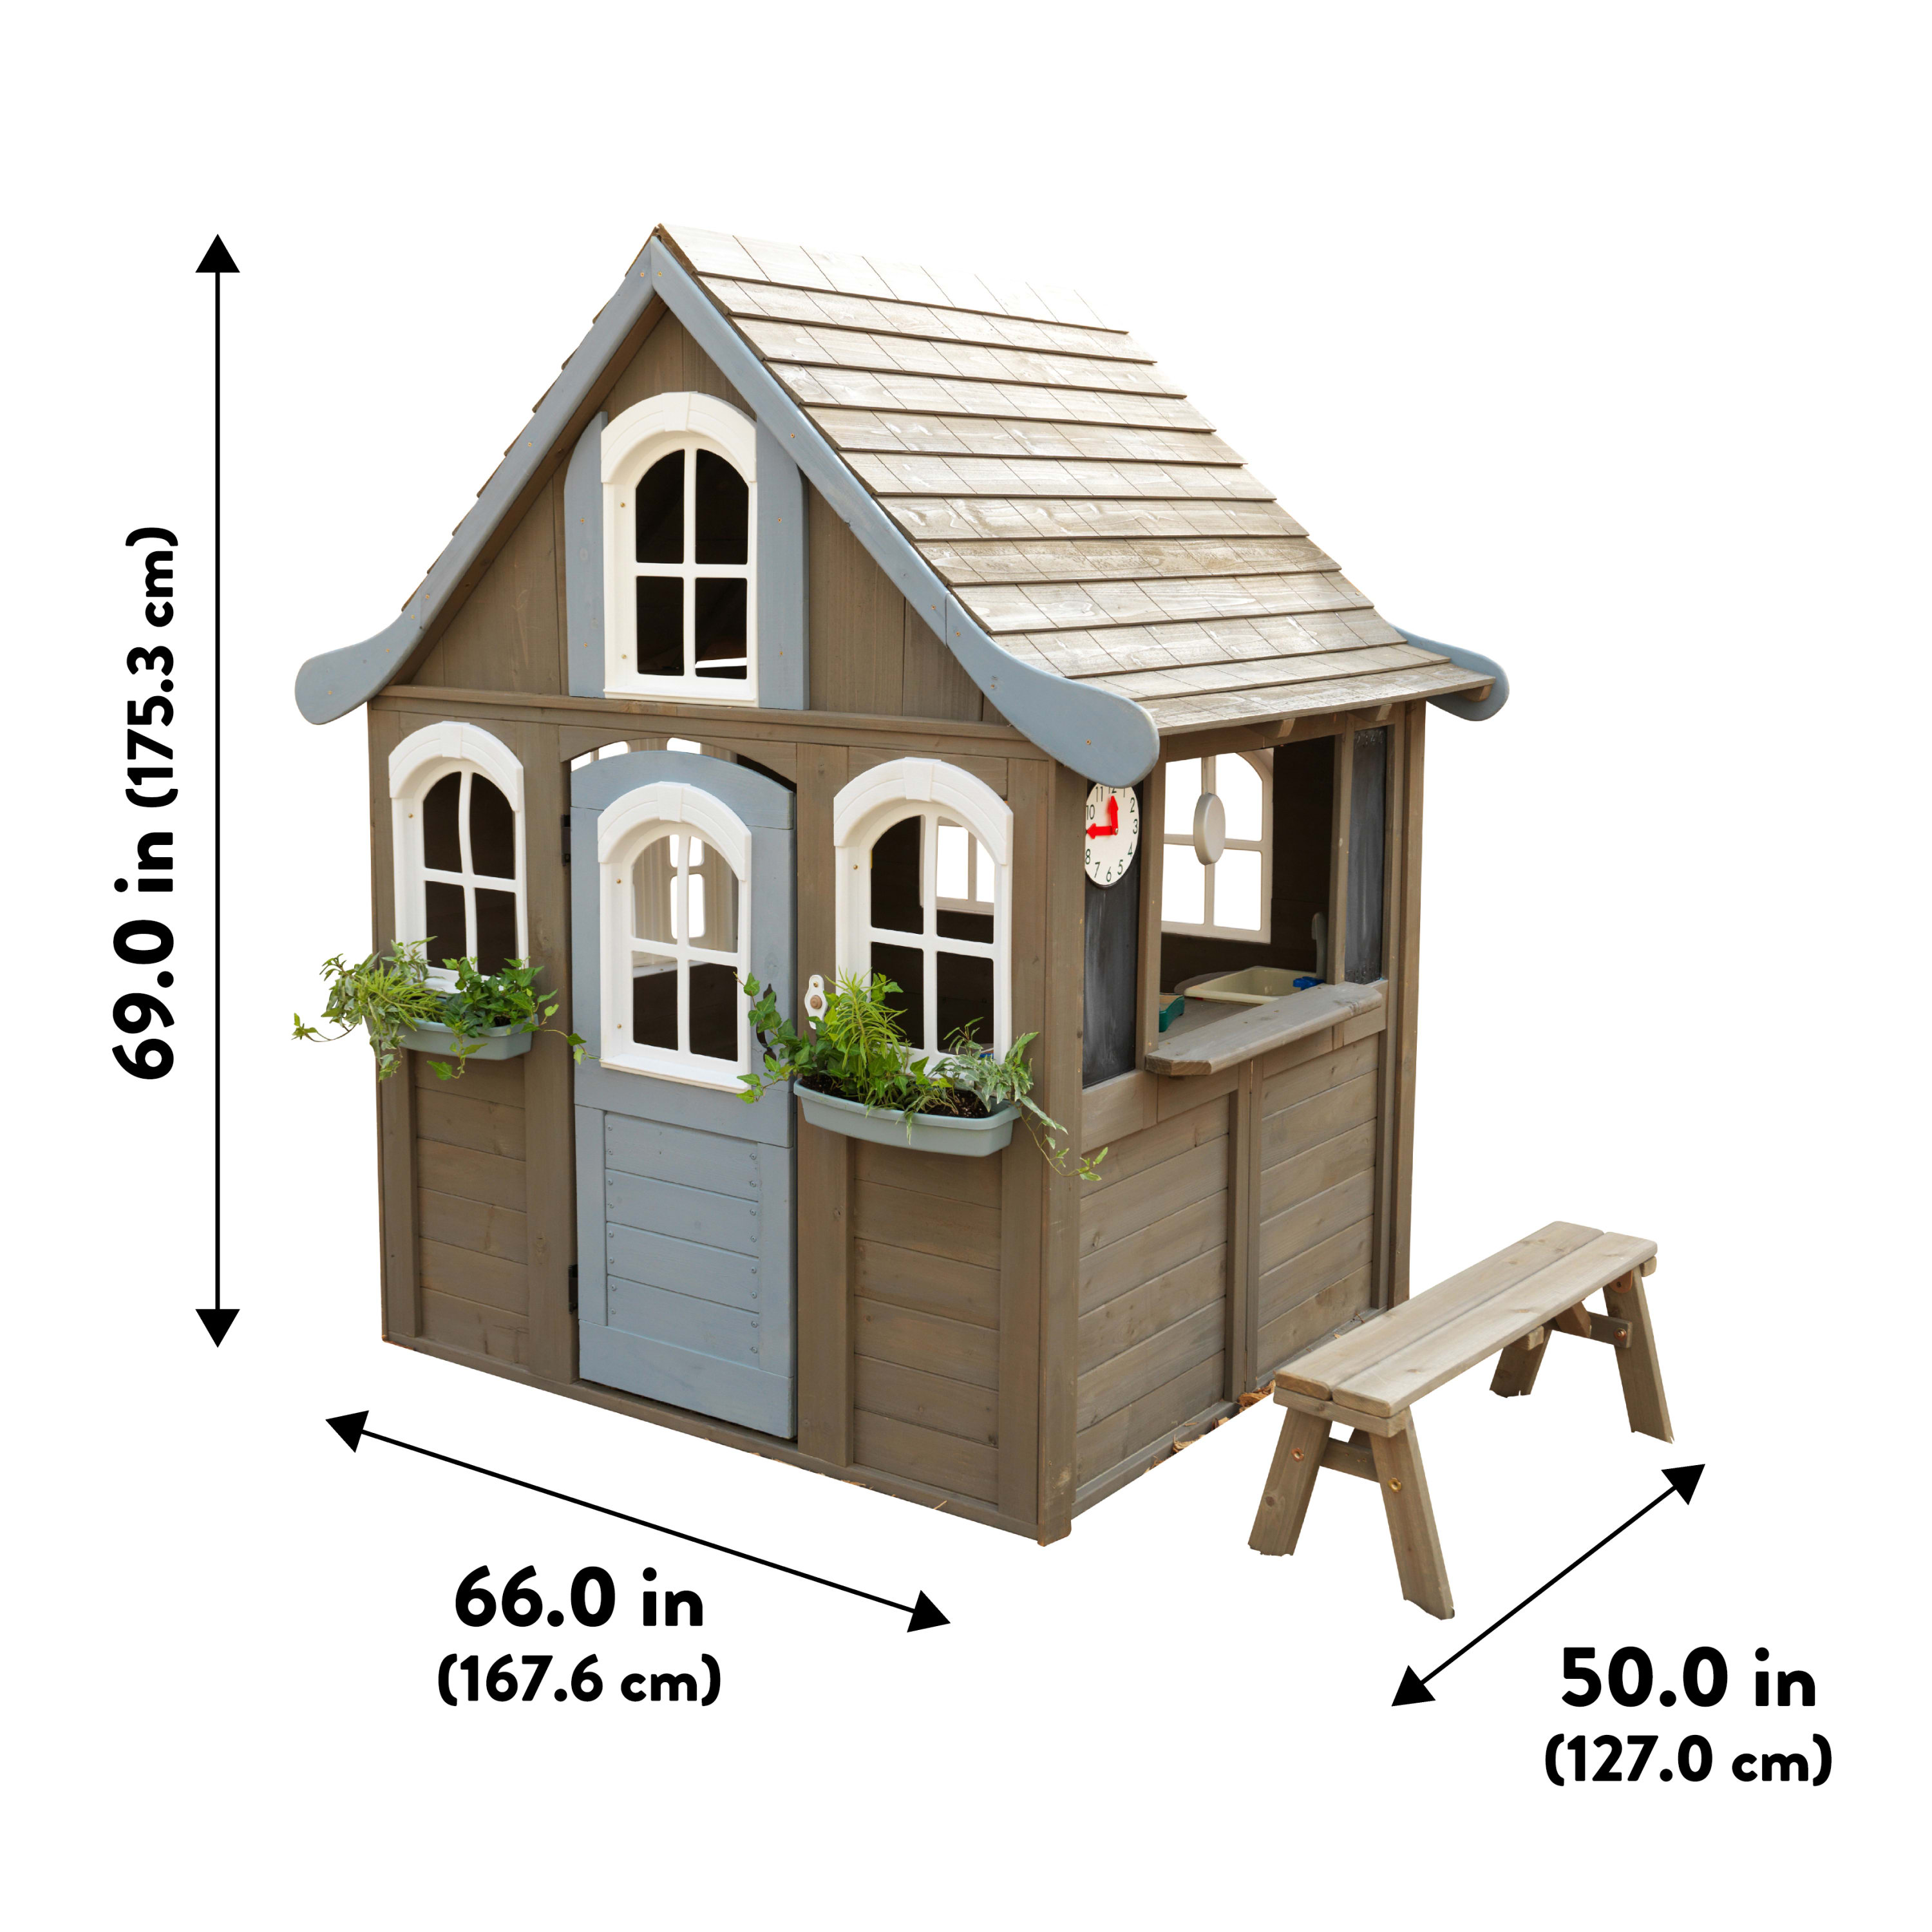 KidKraft Forestview II Wooden Outdoor Playhouse with Ringing Doorbell, Bench and Kitchen - image 15 of 15